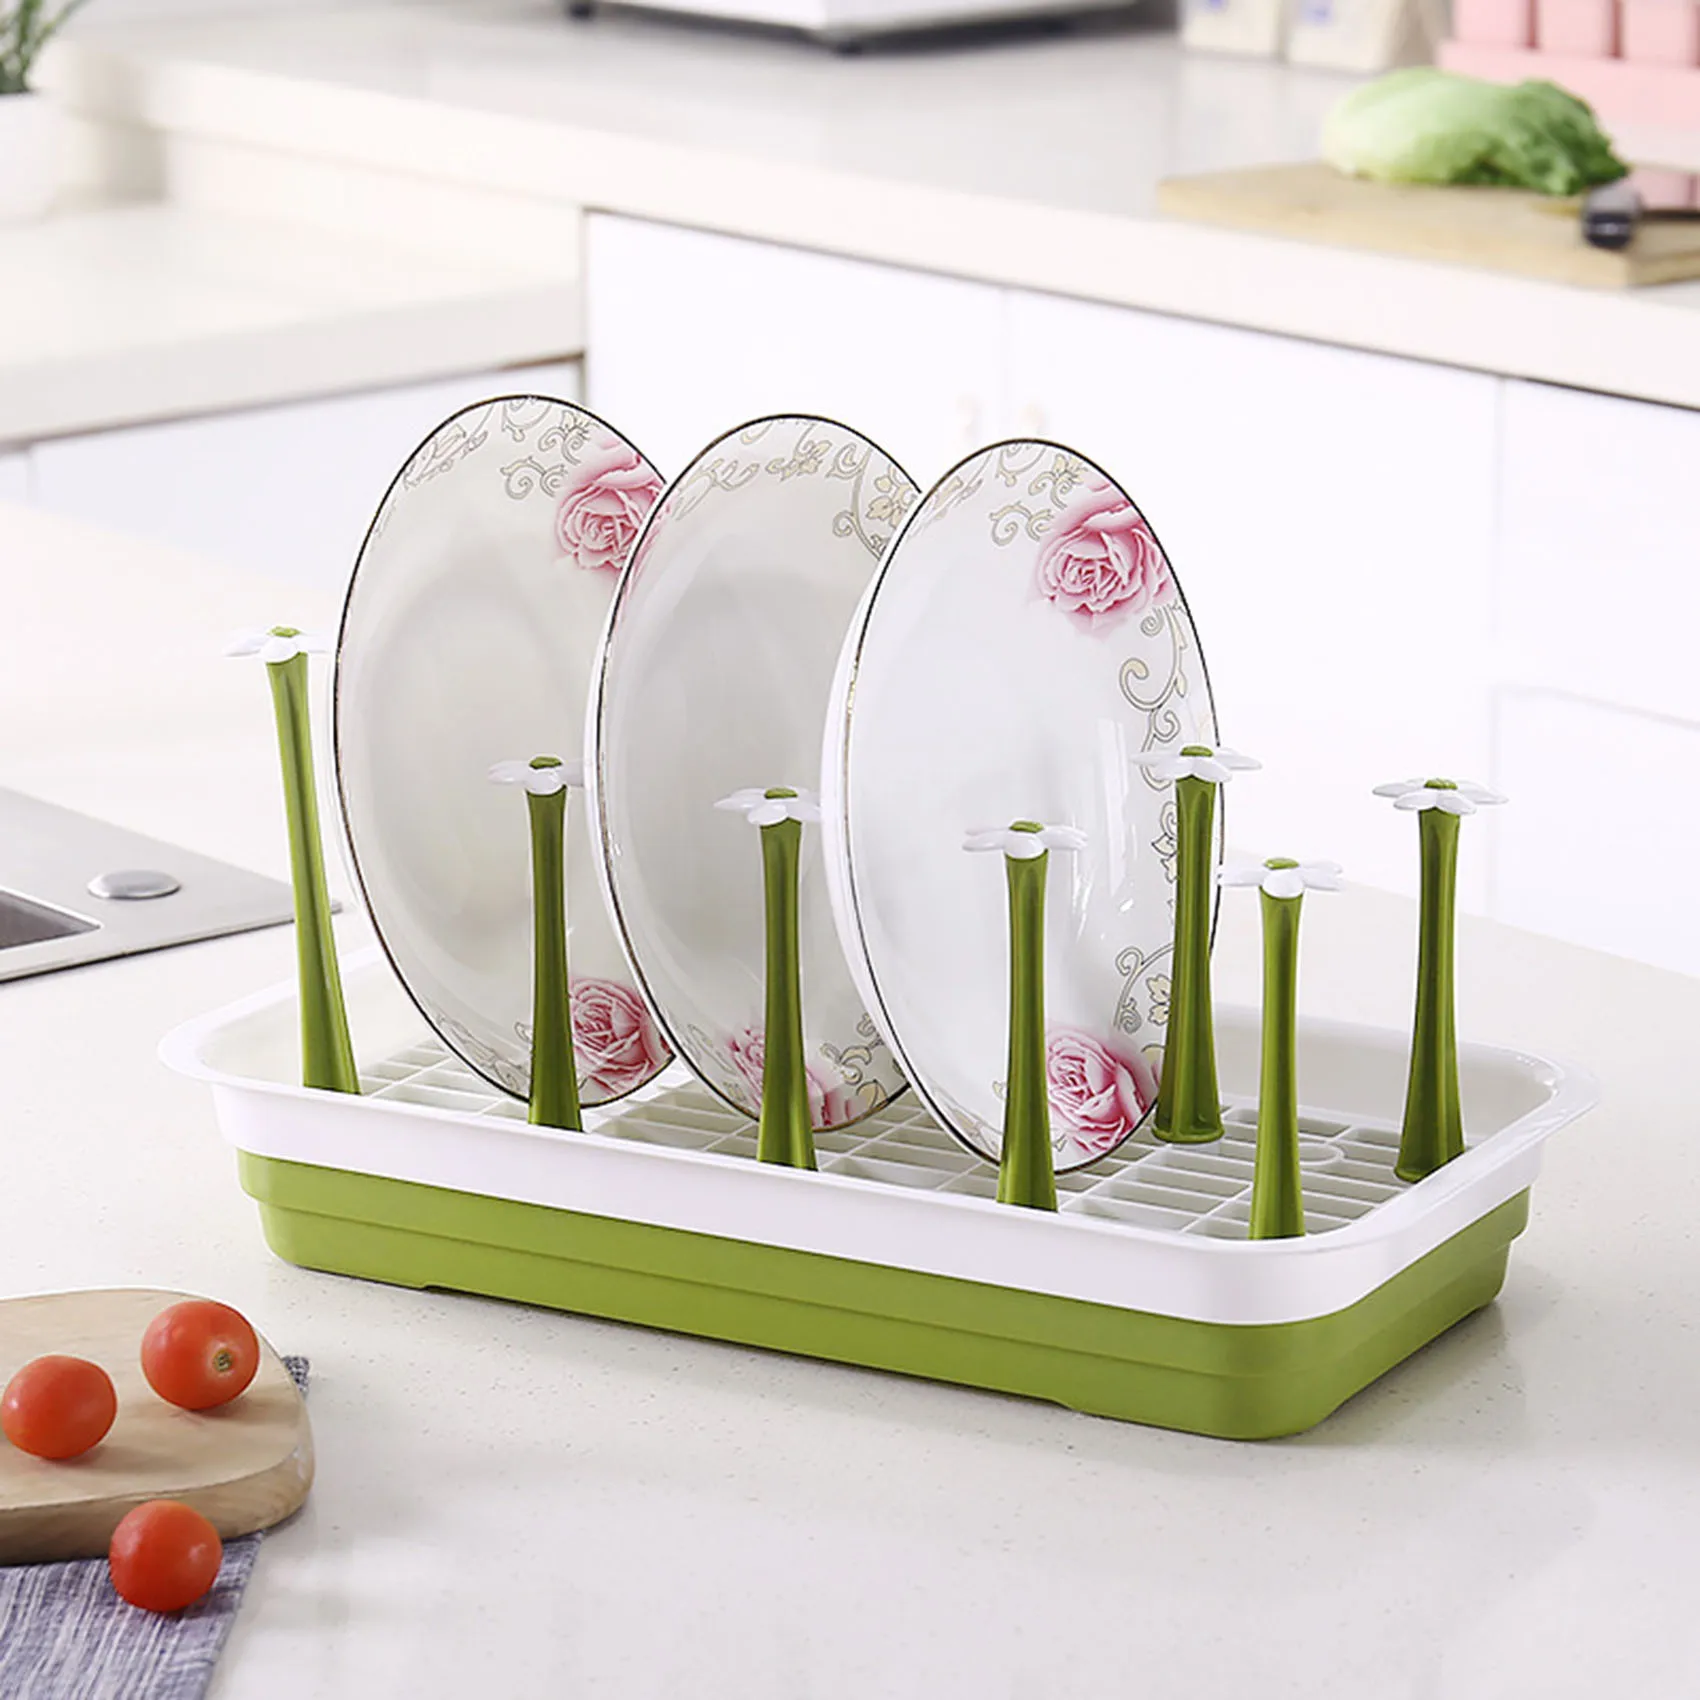 2023 Hot sell Wholesale Kitchen accessories Dish Plate Cutlery Storage Set Tableware Rest Cup holder Drain rack Bowel Holder